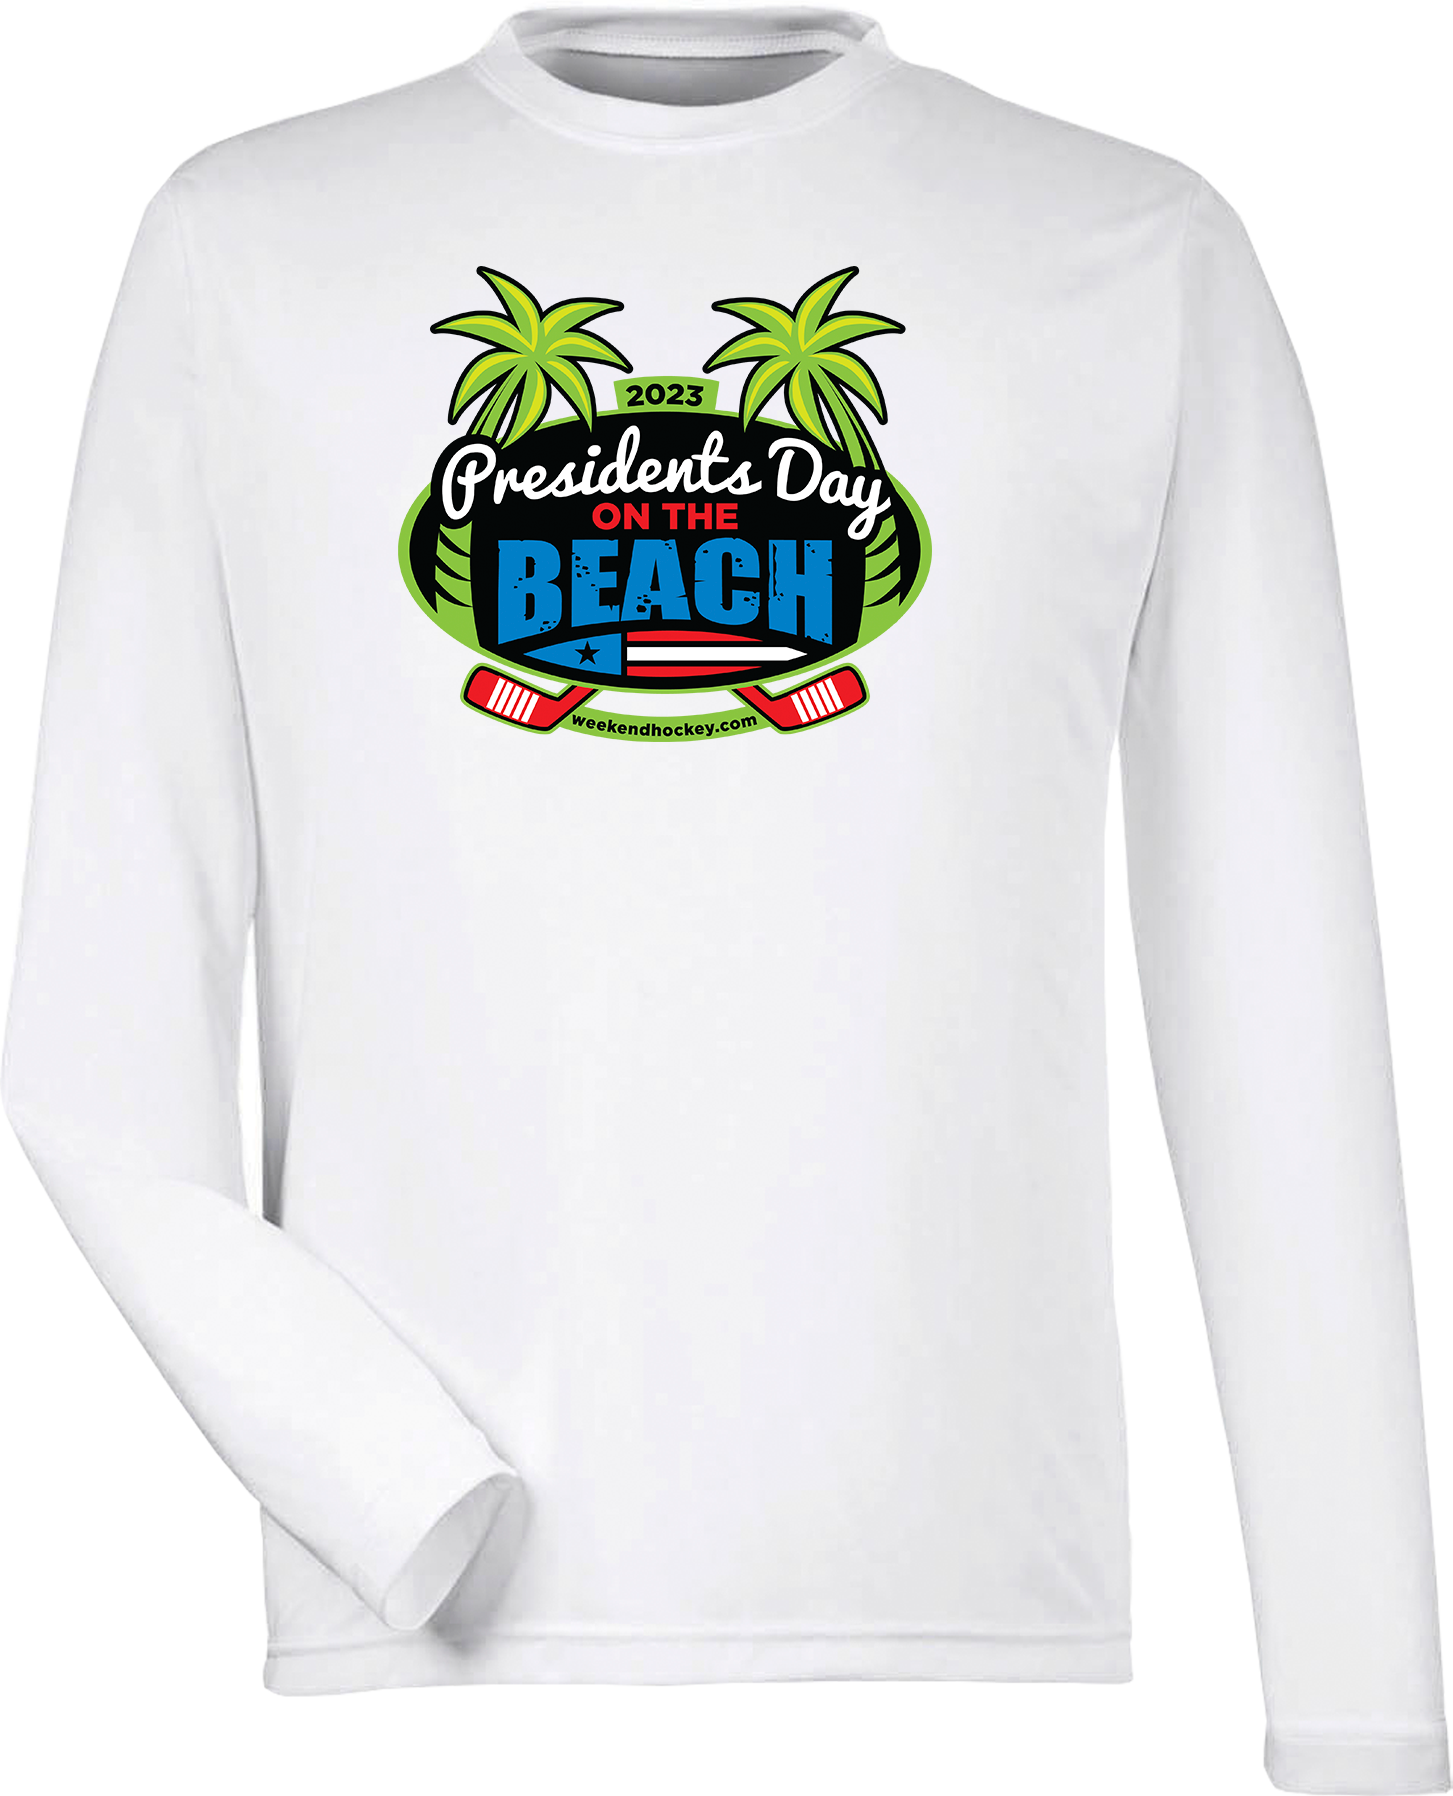 PERFORMANCE SHIRTS - 2023 Presidents Day on the Beach